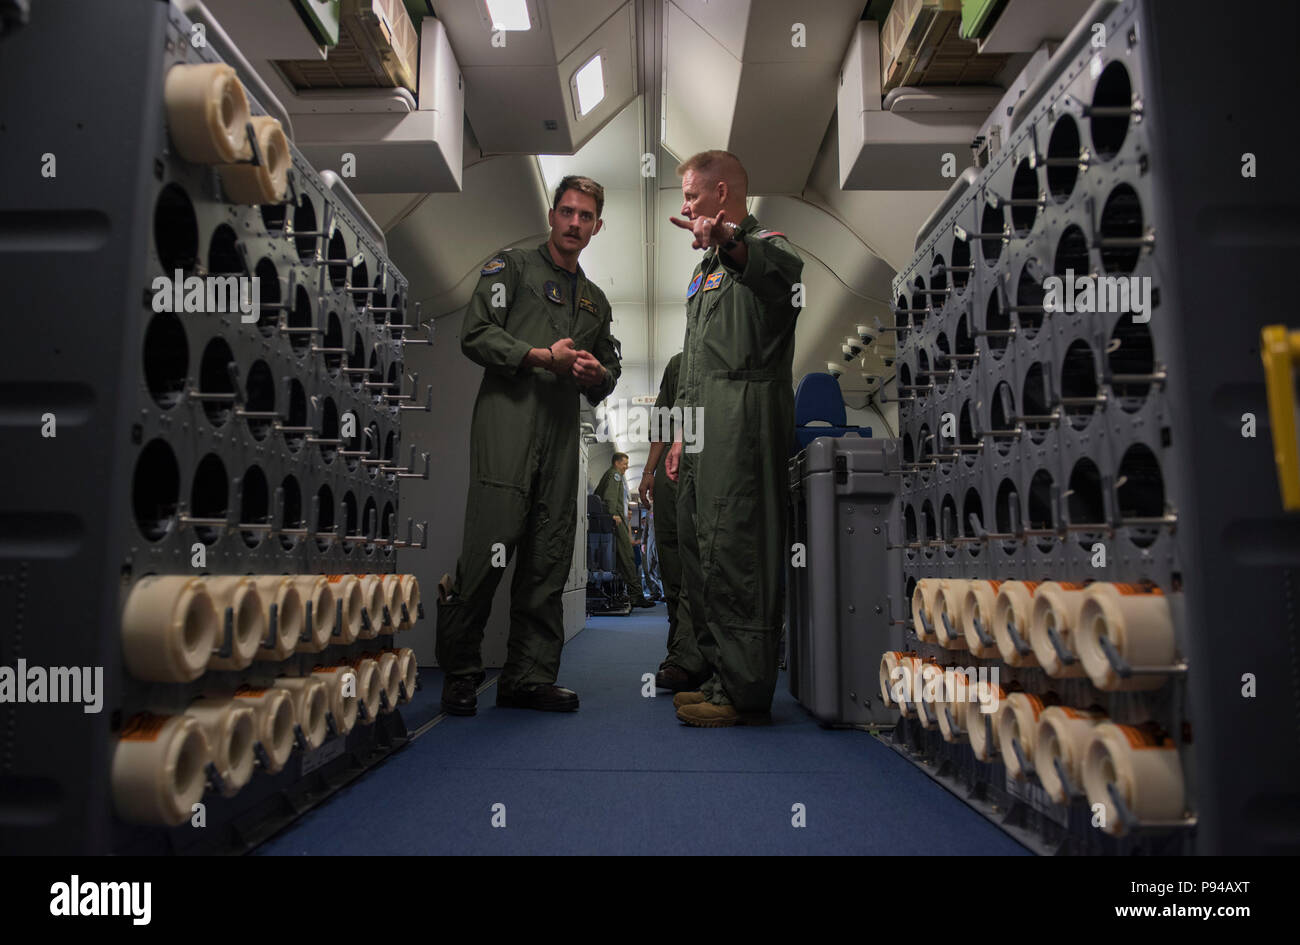 180711-N-OU129-214 CLARK AIR BASE, Philippines (July 11, 2018) Rear Adm. Joey Tynch, Commander, Task Force 73, discusses the capabilities of a P-8 Poseidon maritime surveillance aircraft with Lt. Jack Williamson from Patrol Squadron Four (VP-4) as a part of Maritime Training Activity (MTA) Sama Sama 2018. The week-long engagement focuses on the full spectrum of naval capabilities and is designed to strengthen the close partnership between both navies while cooperatively ensuring maritime security, stability and prosperity. (U.S. Navy photo by Mass Communication Specialist 2nd Class Joshua Fult Stock Photo